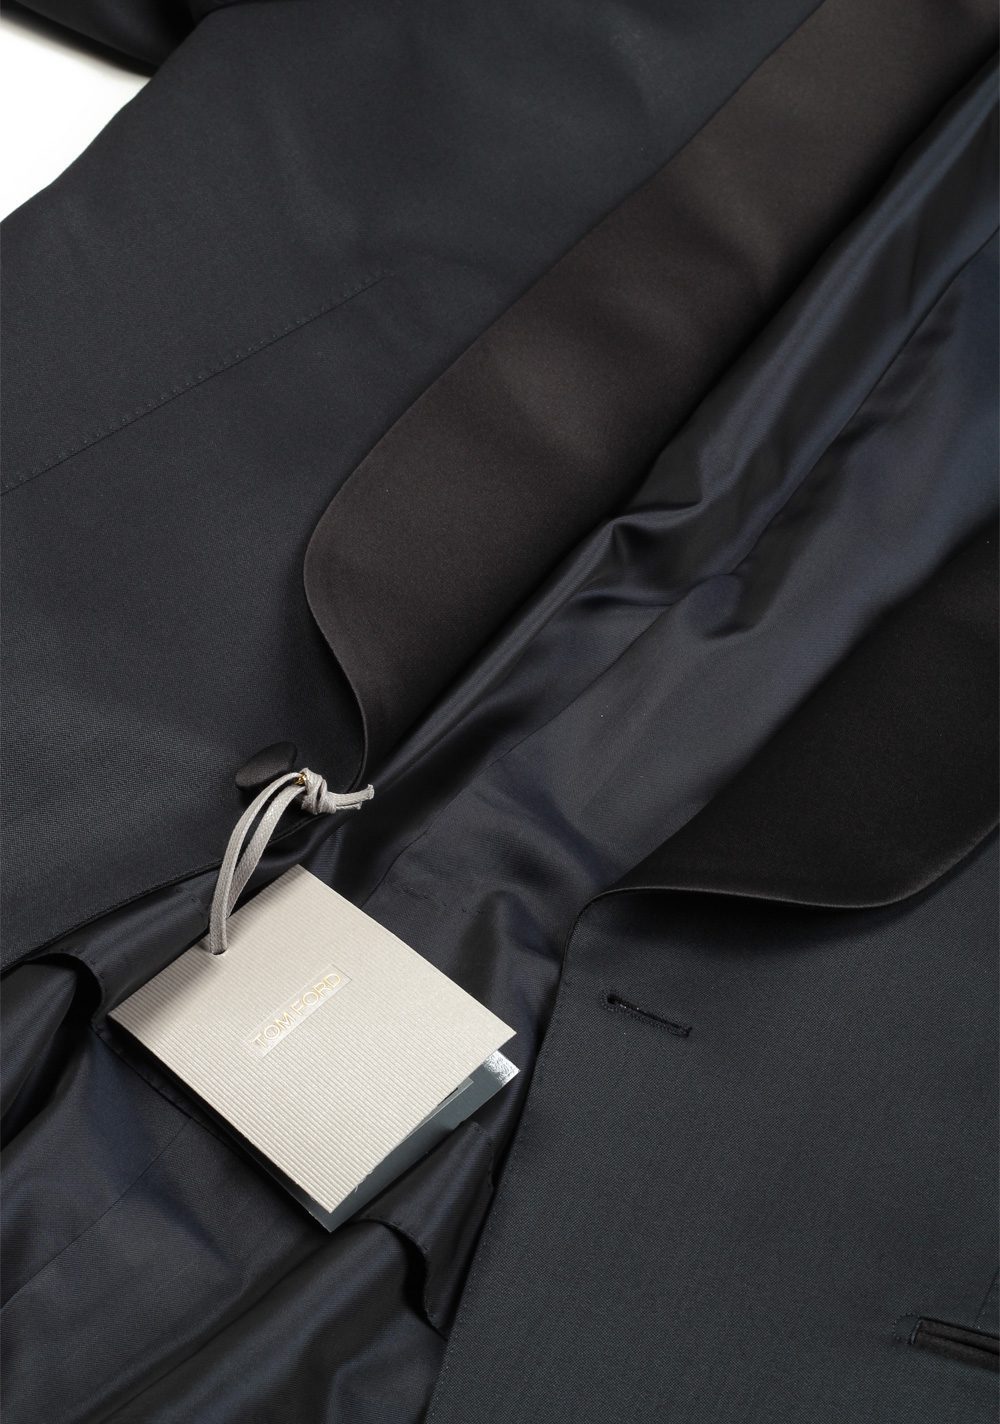 TOM FORD O’Connor Midnight Blue Tuxedo Suit Size 52 / 42R U.S. Shawl Collar Fit Y | Costume Limité